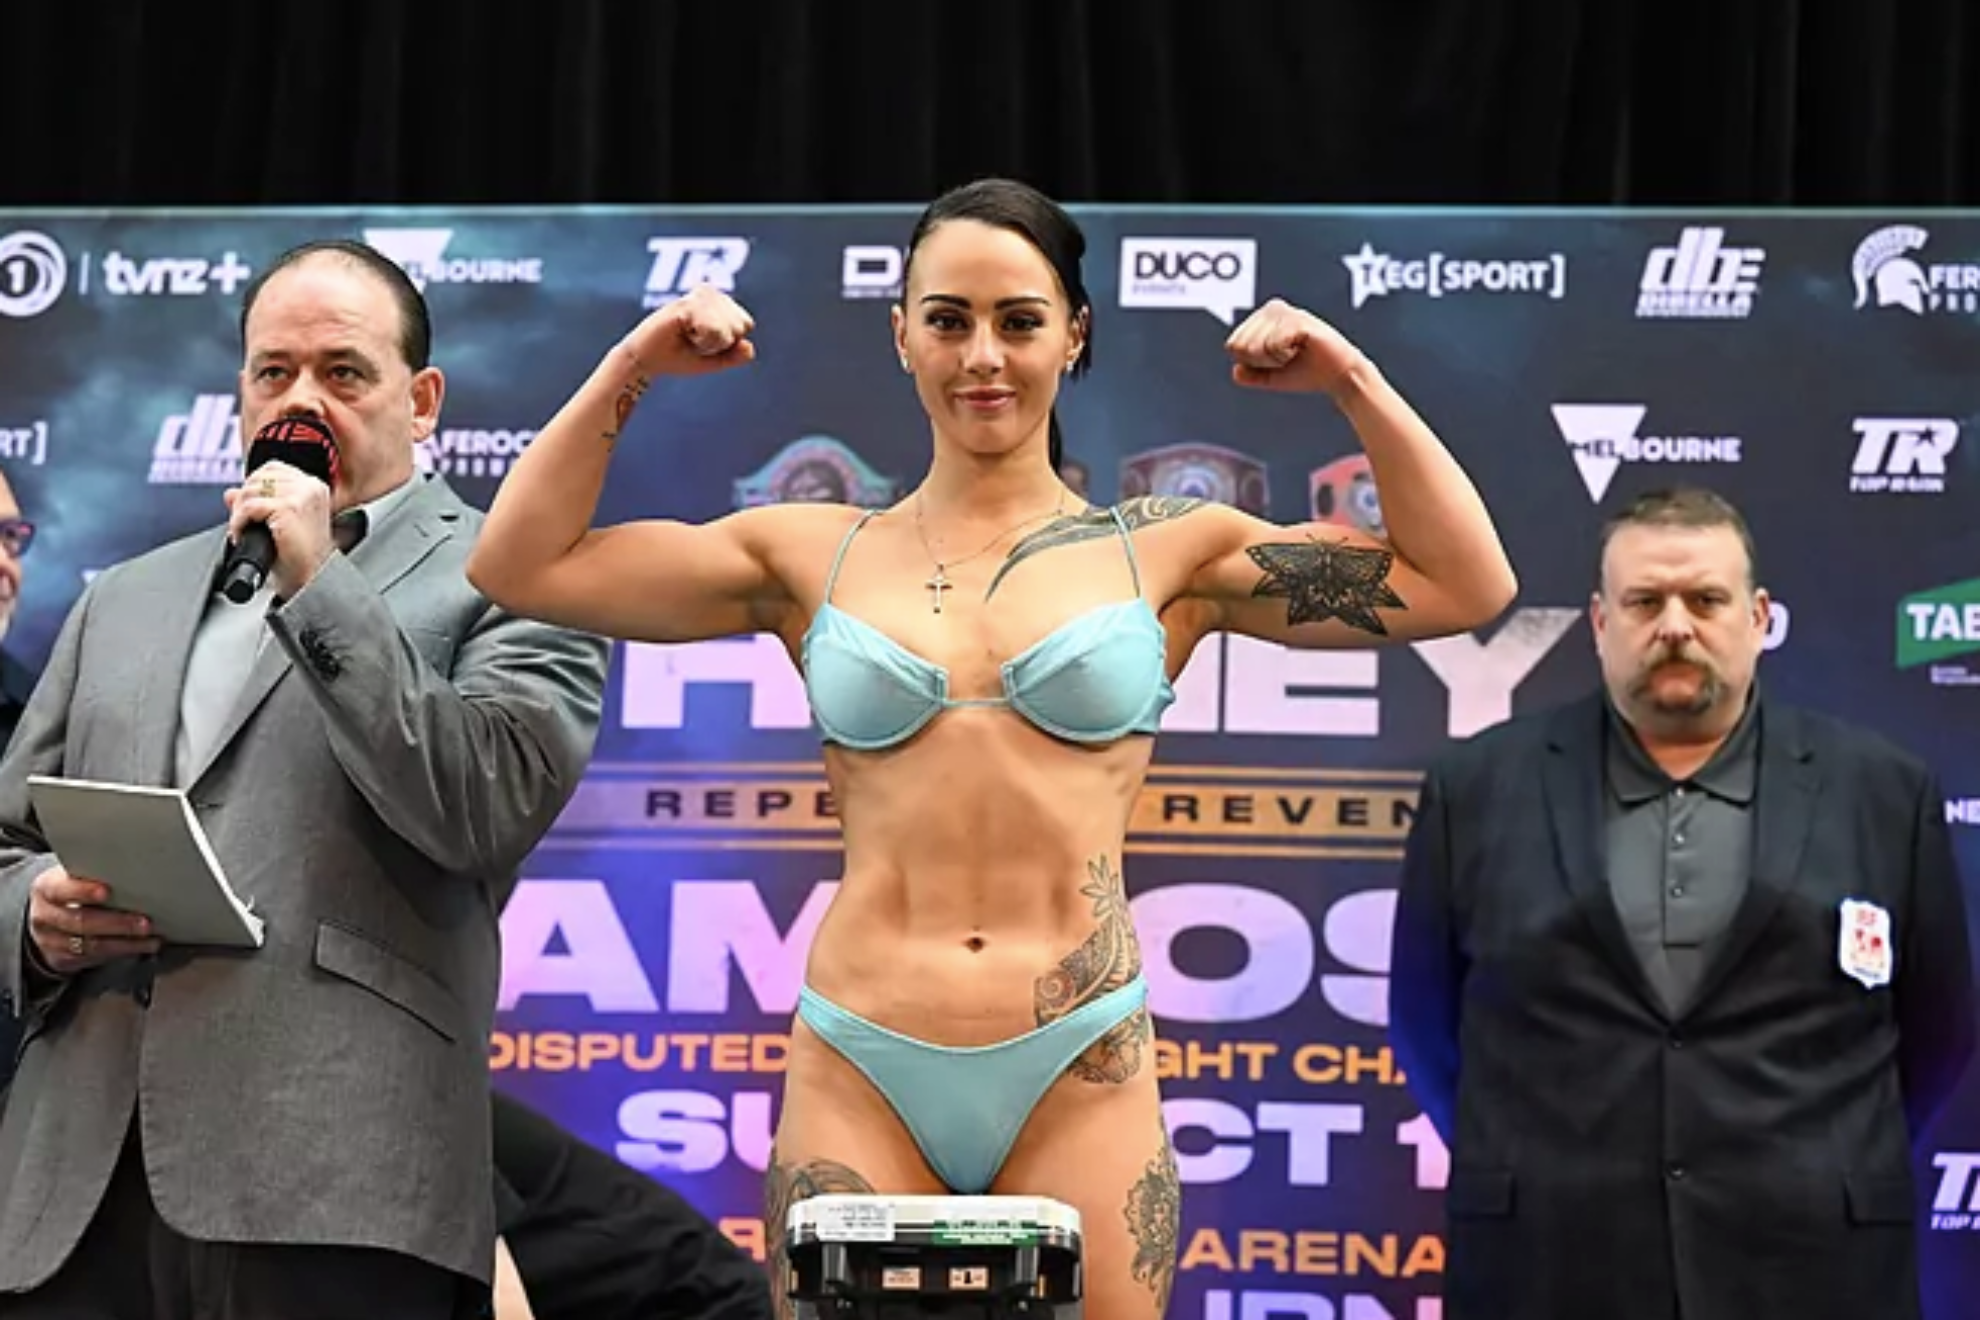 World champion Cherneka Johnson attends the weigh-in topless and covered in body paint